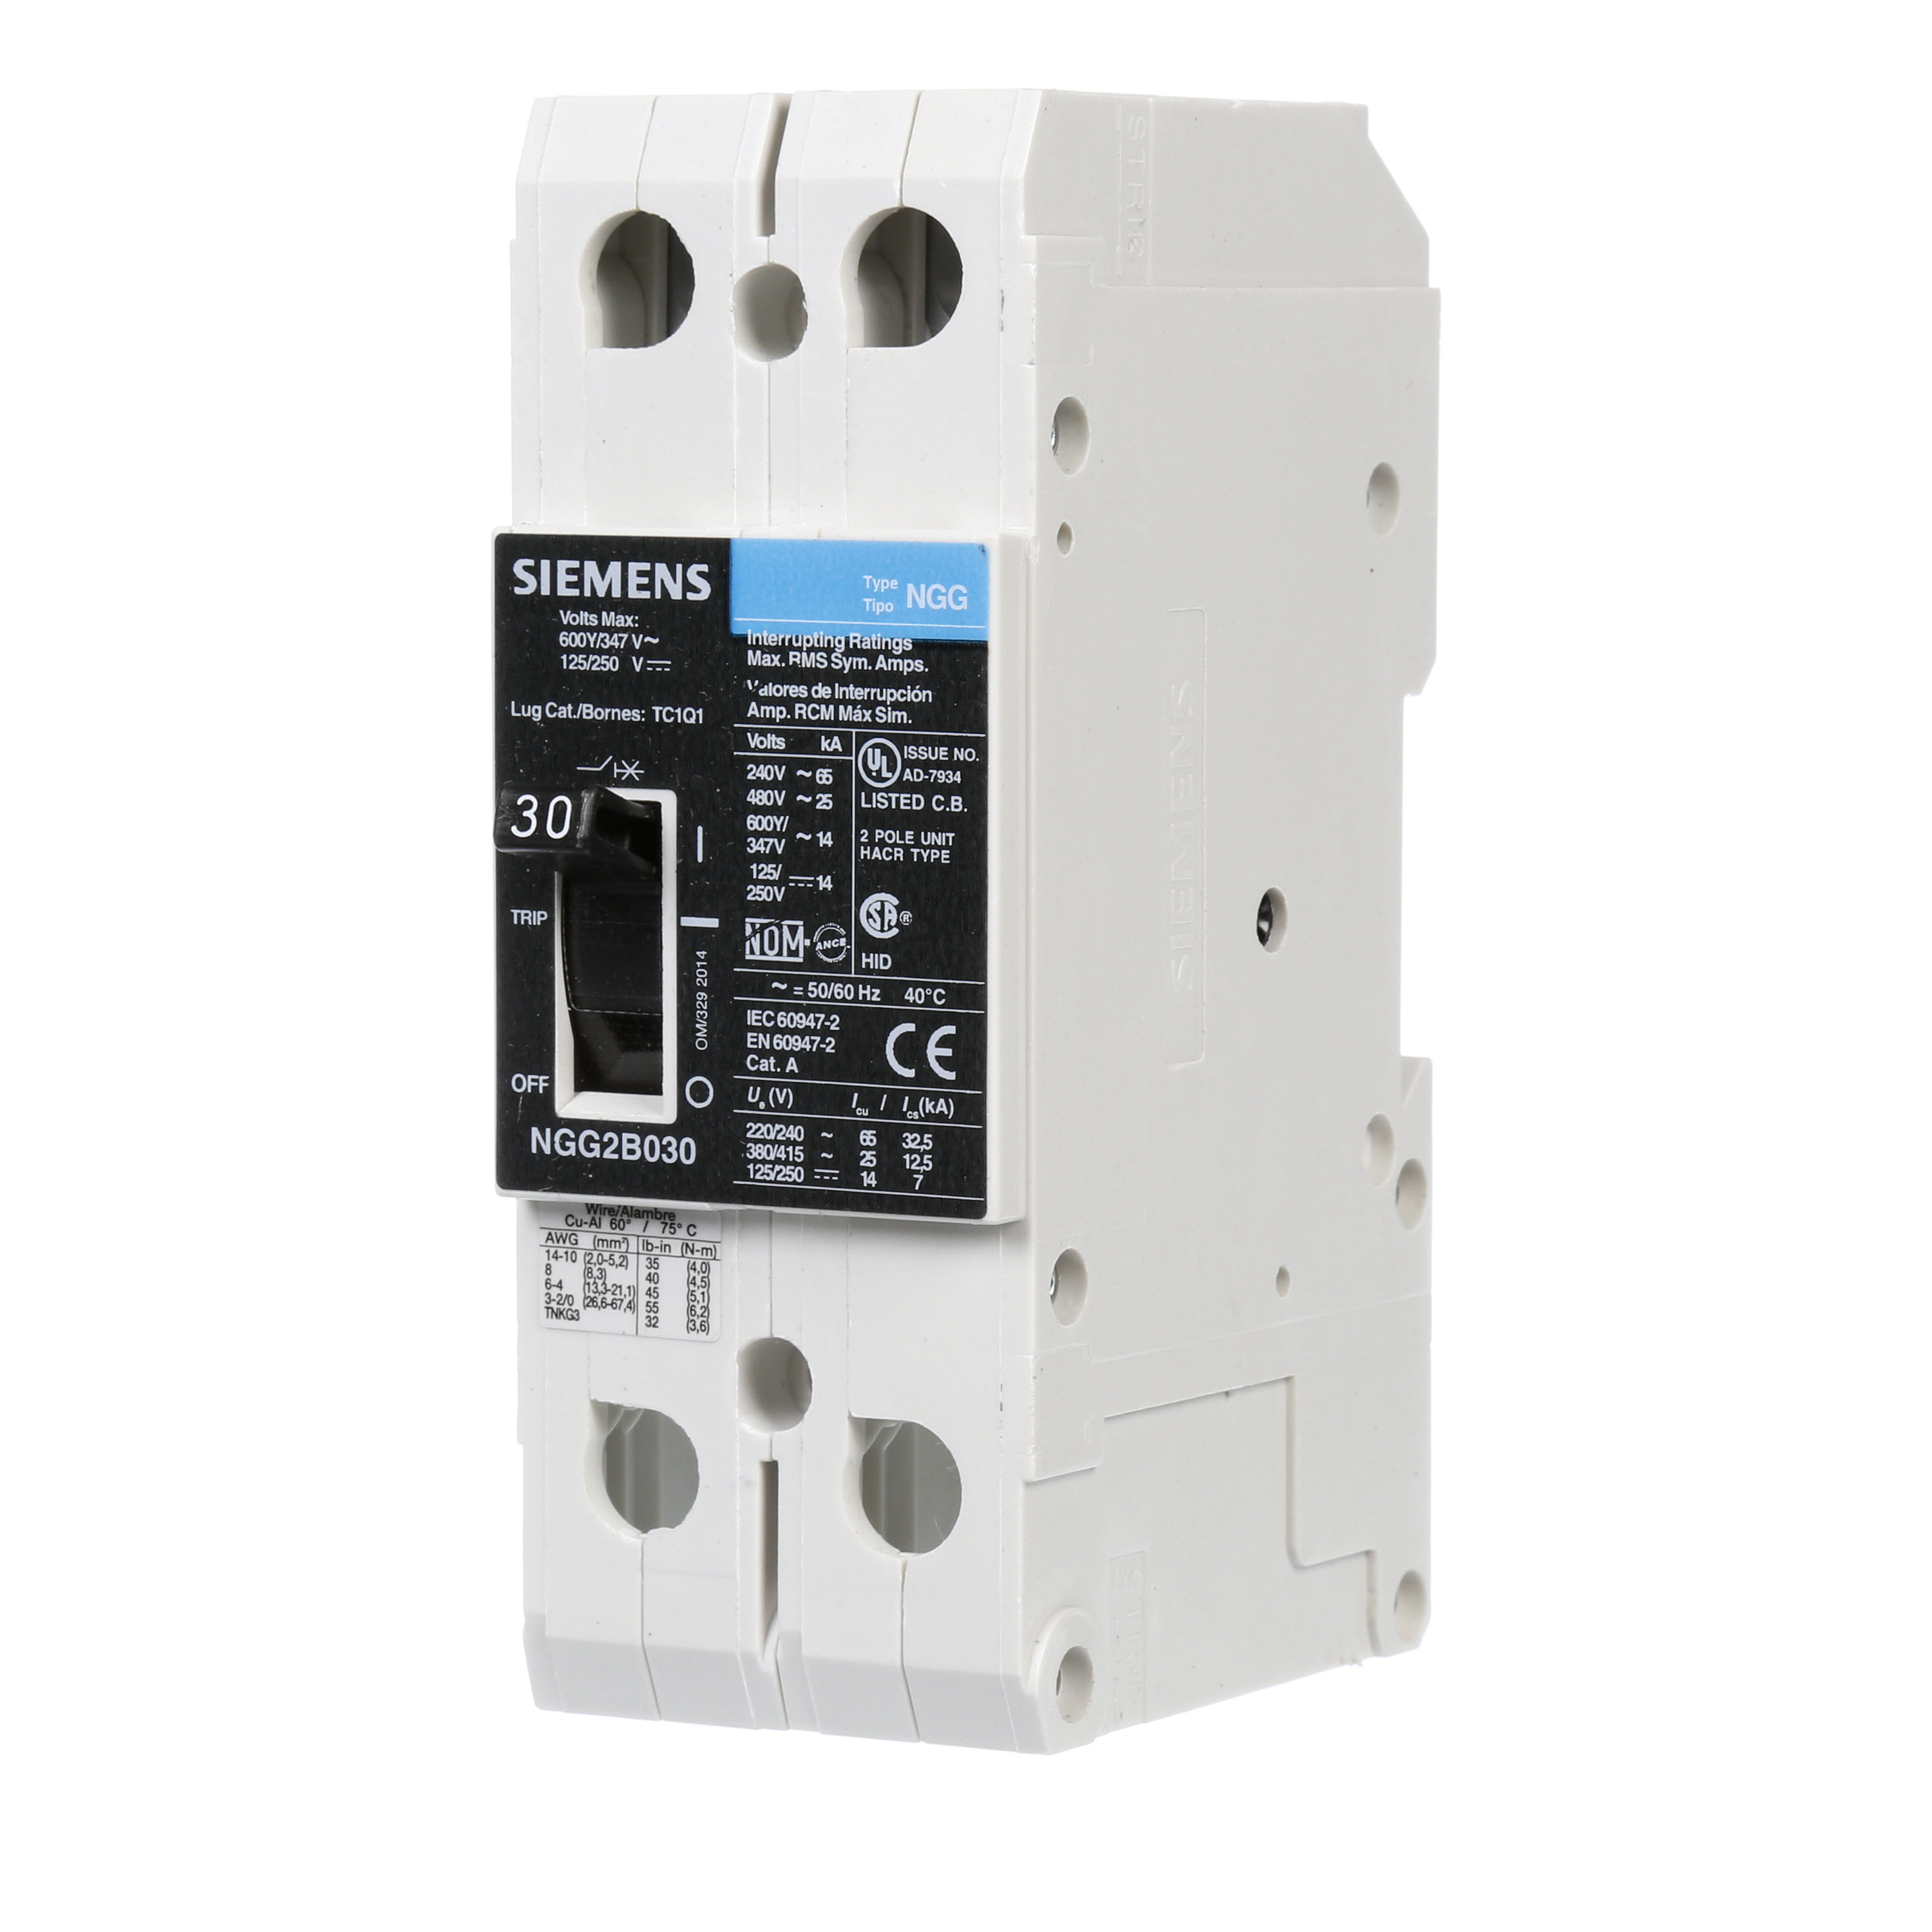 SIEMENS LOW VOLTAGE G FRAME CIRCUIT BREAKER WITH THERMAL - MAGNETIC TRIP. UL LISTED NGG FRAME WITH STANDARD BREAKING CAPACITY. 30A 2-POLE (14KAIC AT 600Y/347V)(25KAIC AT 480V). SPECIAL FEATURES MOUNTS ON DIN RAIL / SCREW, NO LUGS. DIMENSIONS (W x H x D) IN 2 x 5.4 x 2.8.